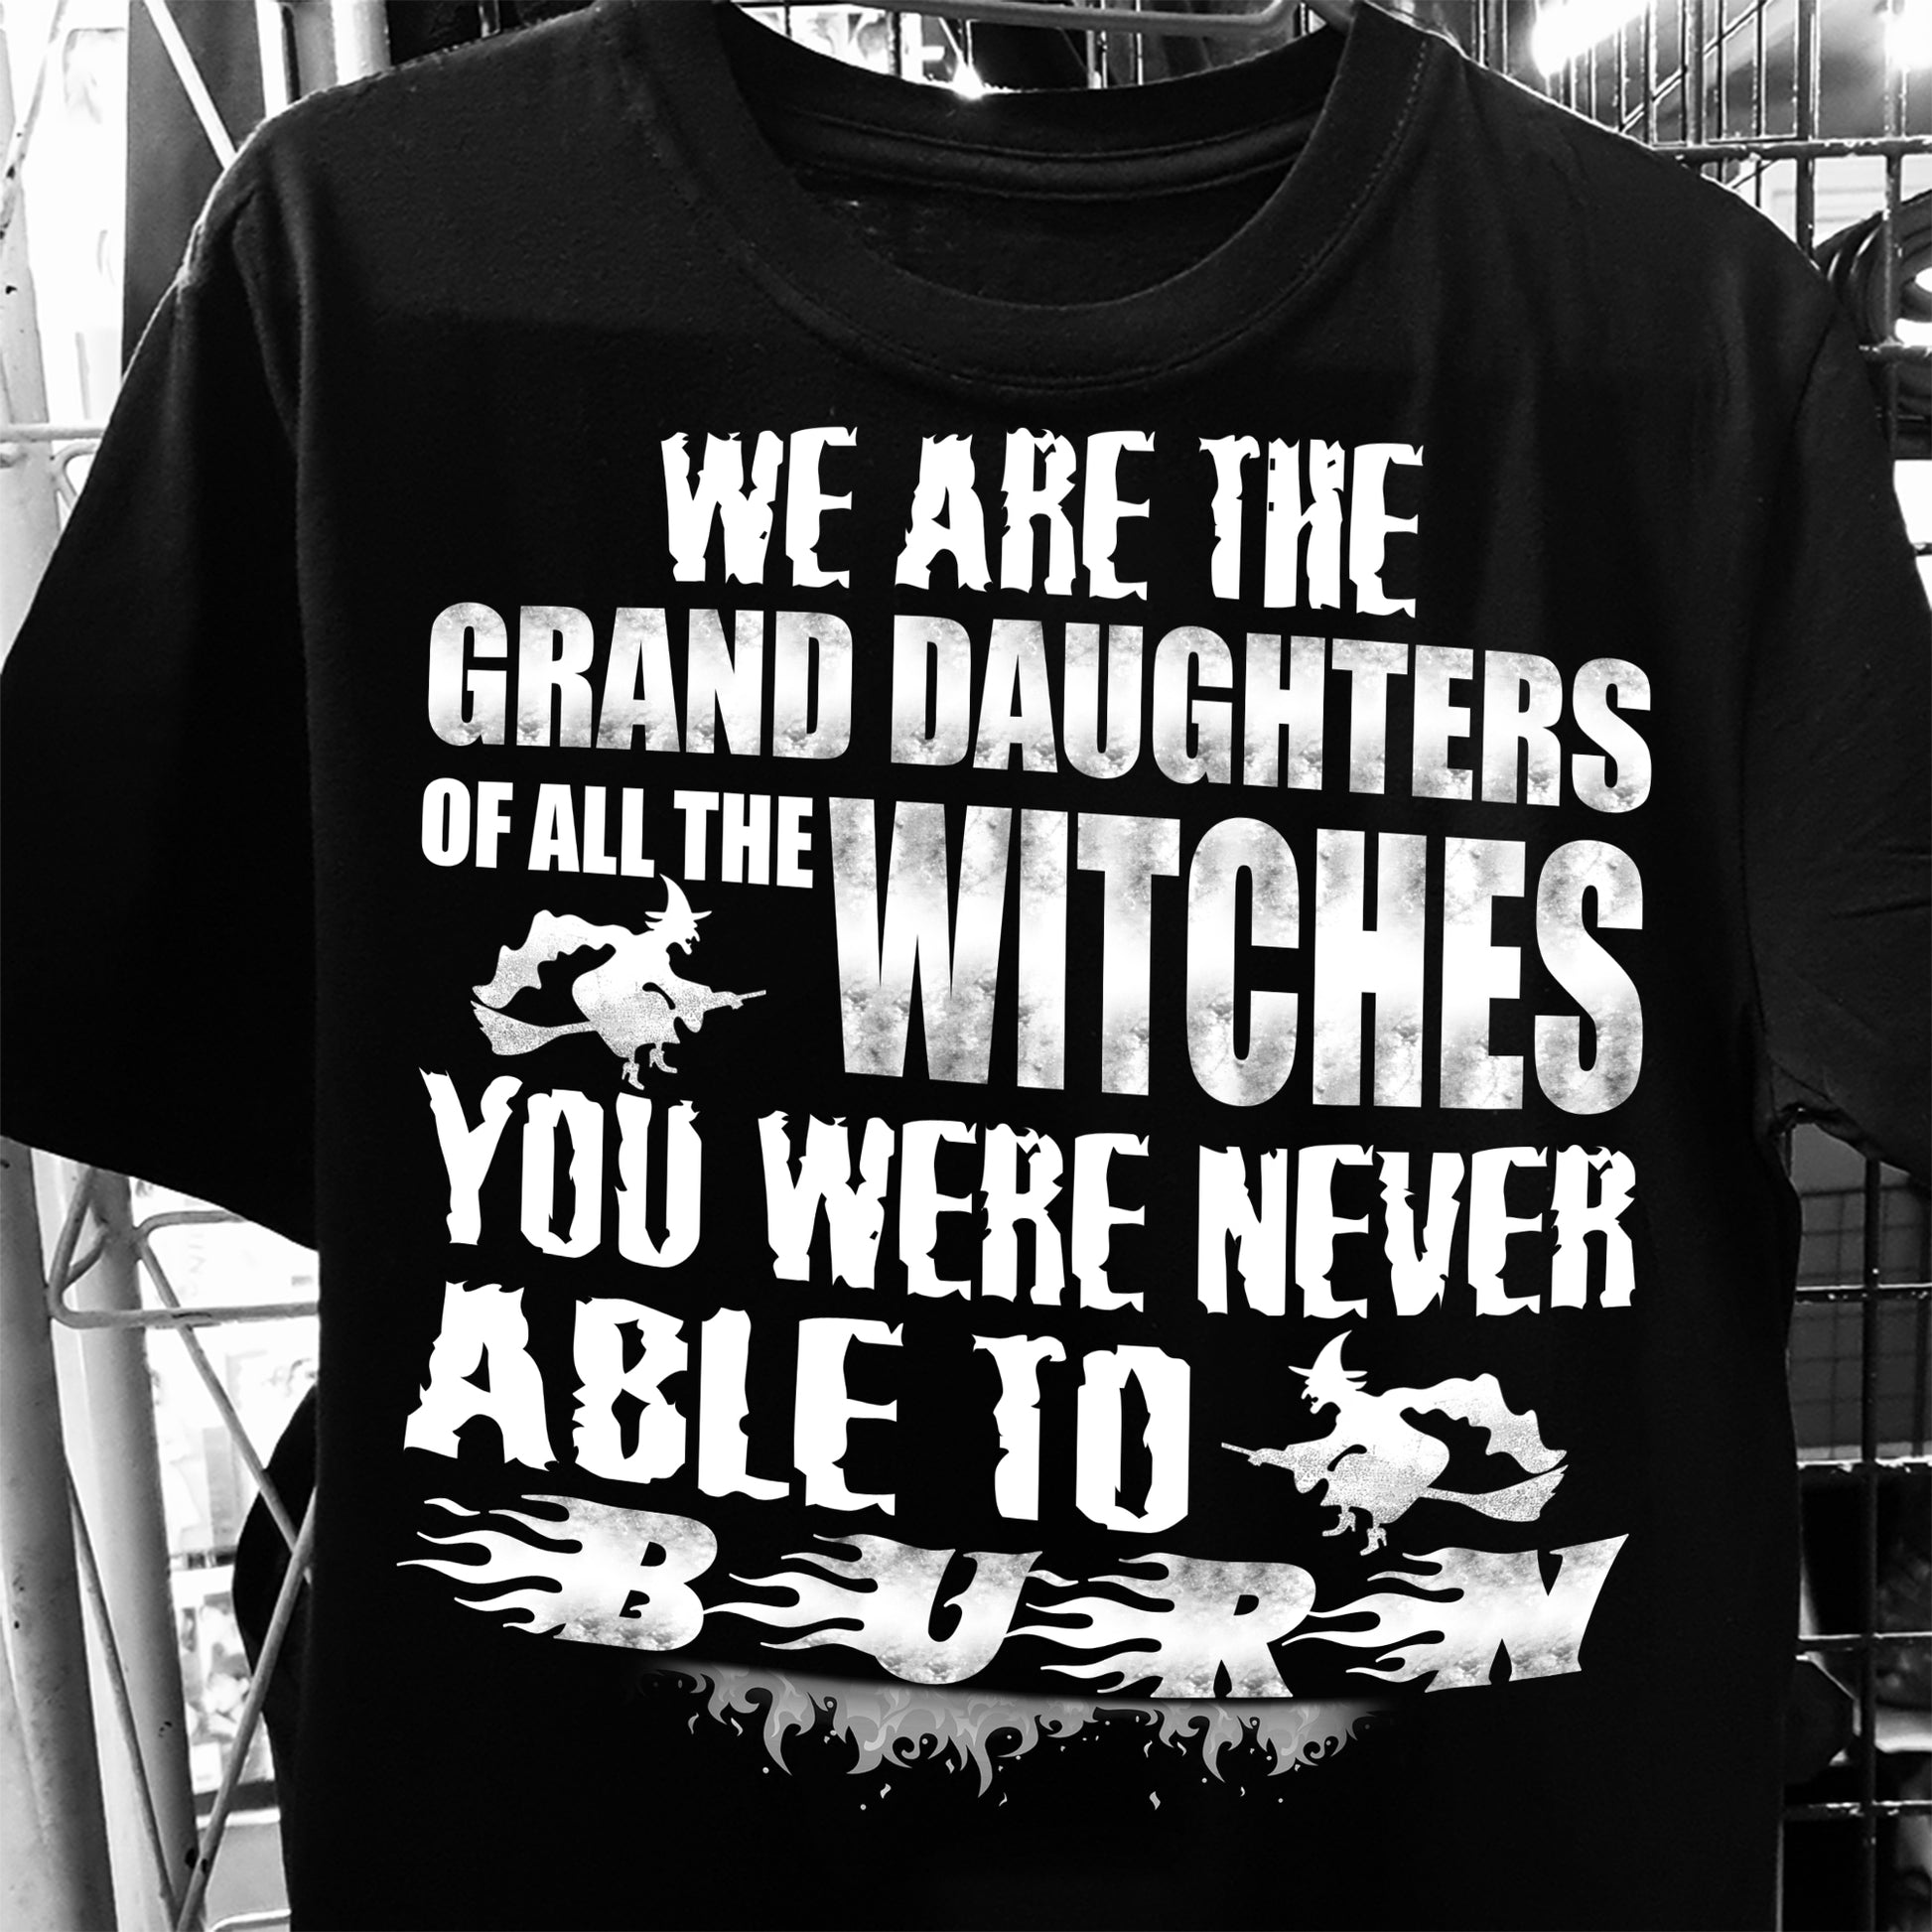 Witch Tshirt We are the grand daughters-MoonChildWorld